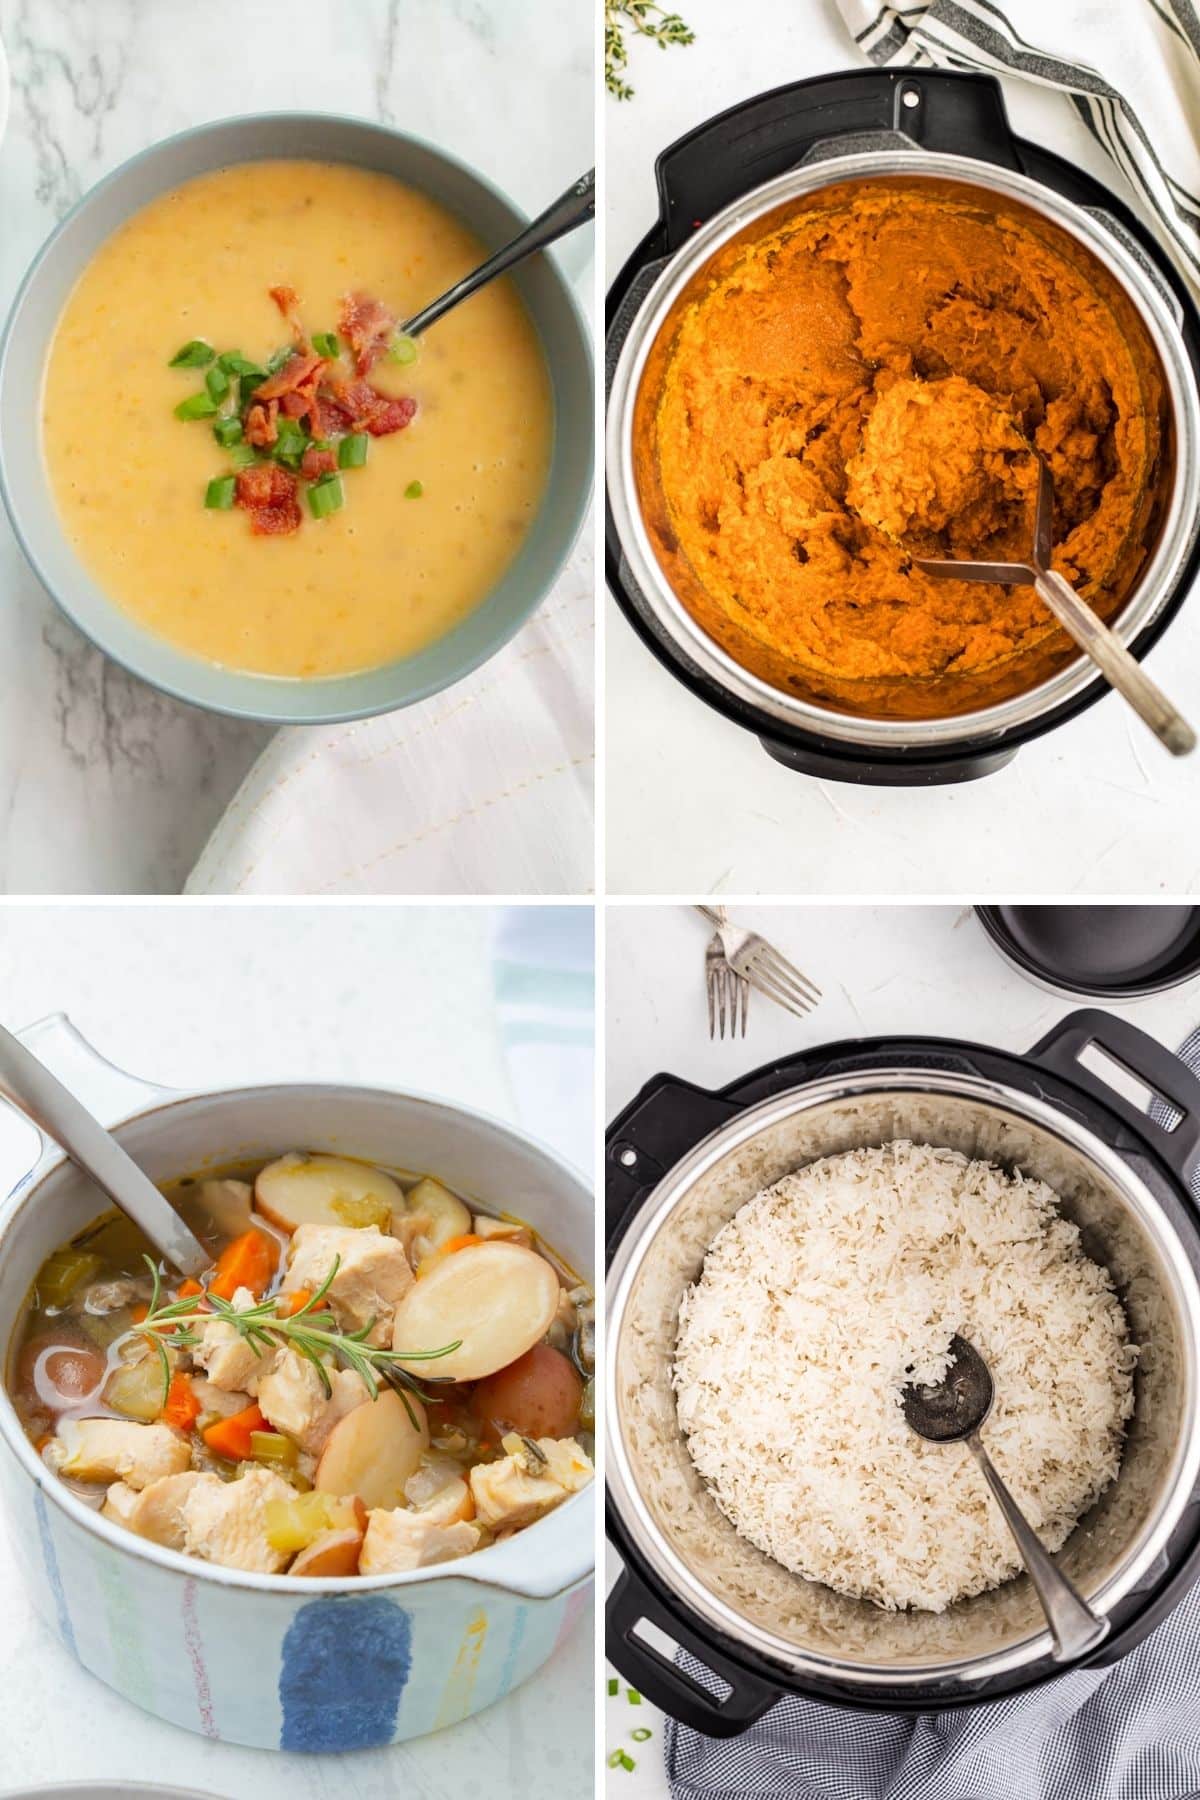 One Bag Instant Pot Meals - Clean Eating - 90/10 Nutrition